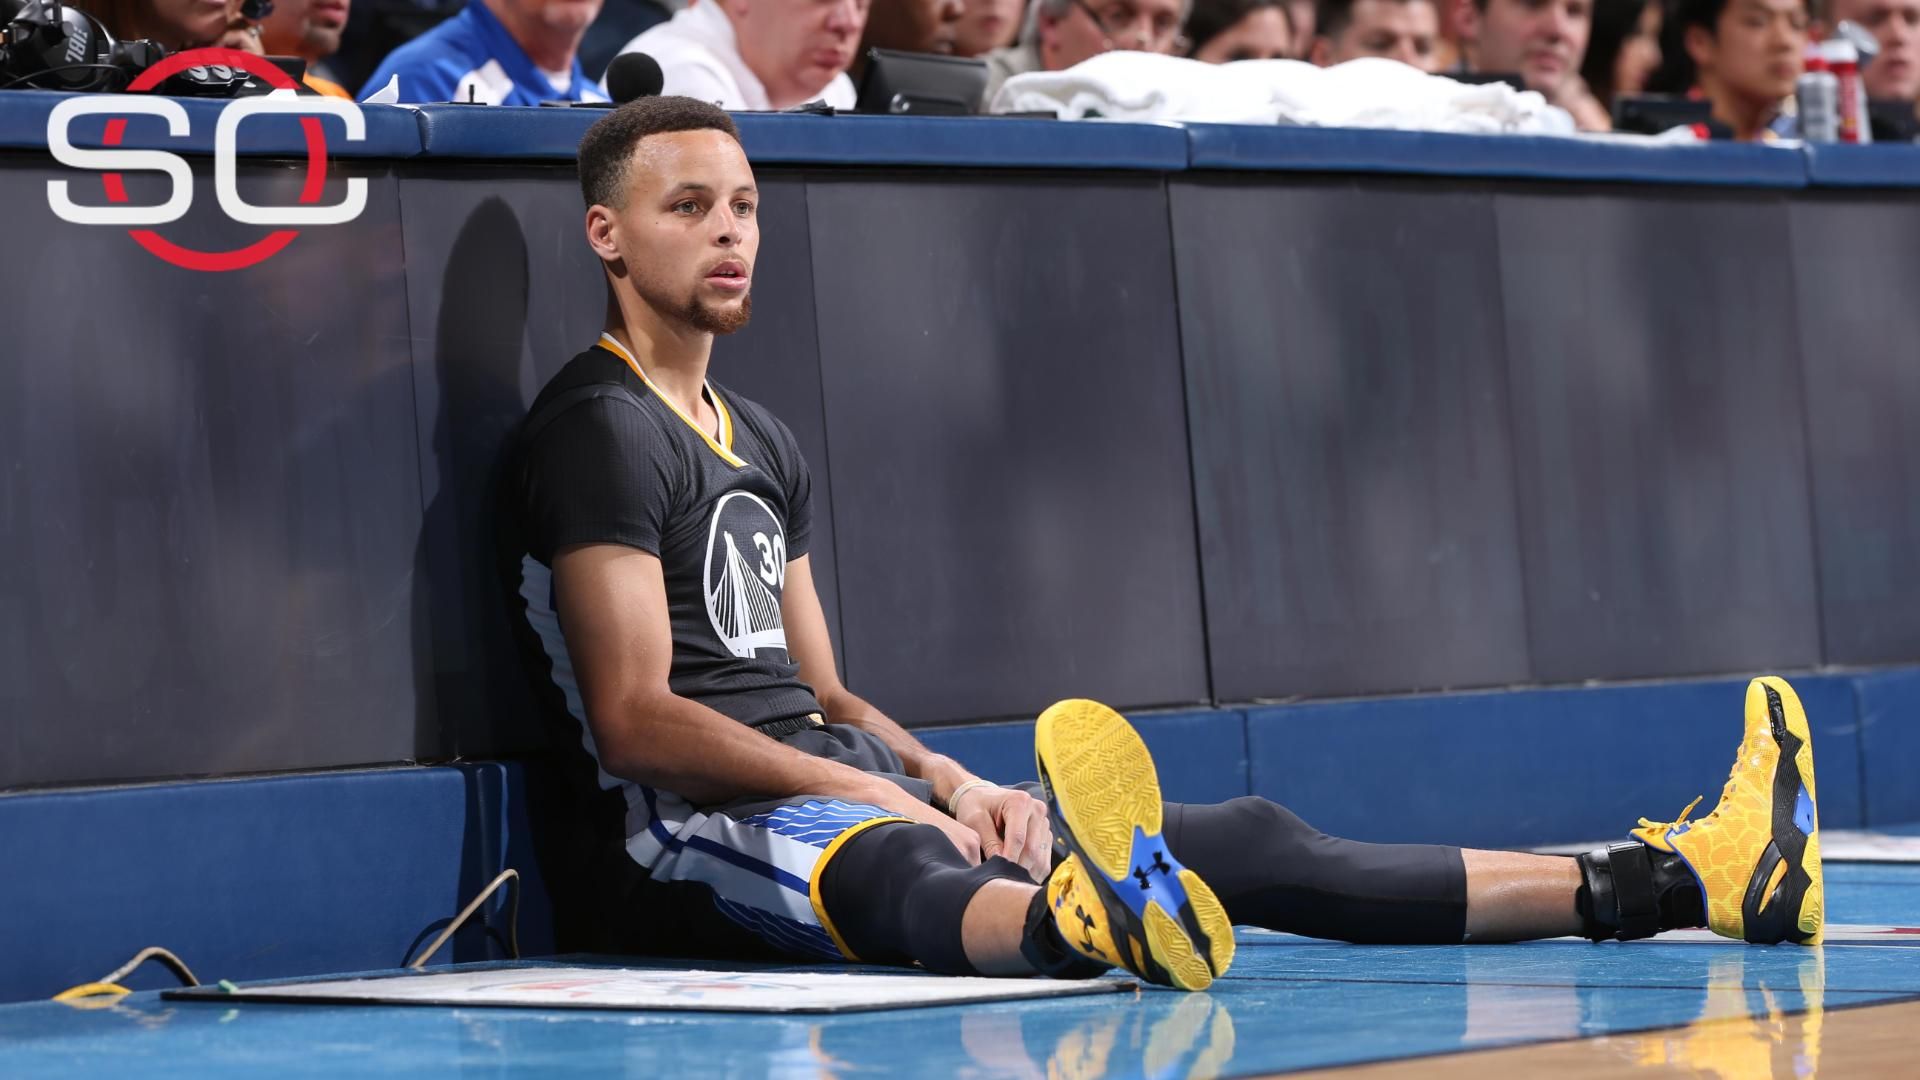 Stephen Curry leaves Friday's game vs. Hawks with left knee injury – KNBR